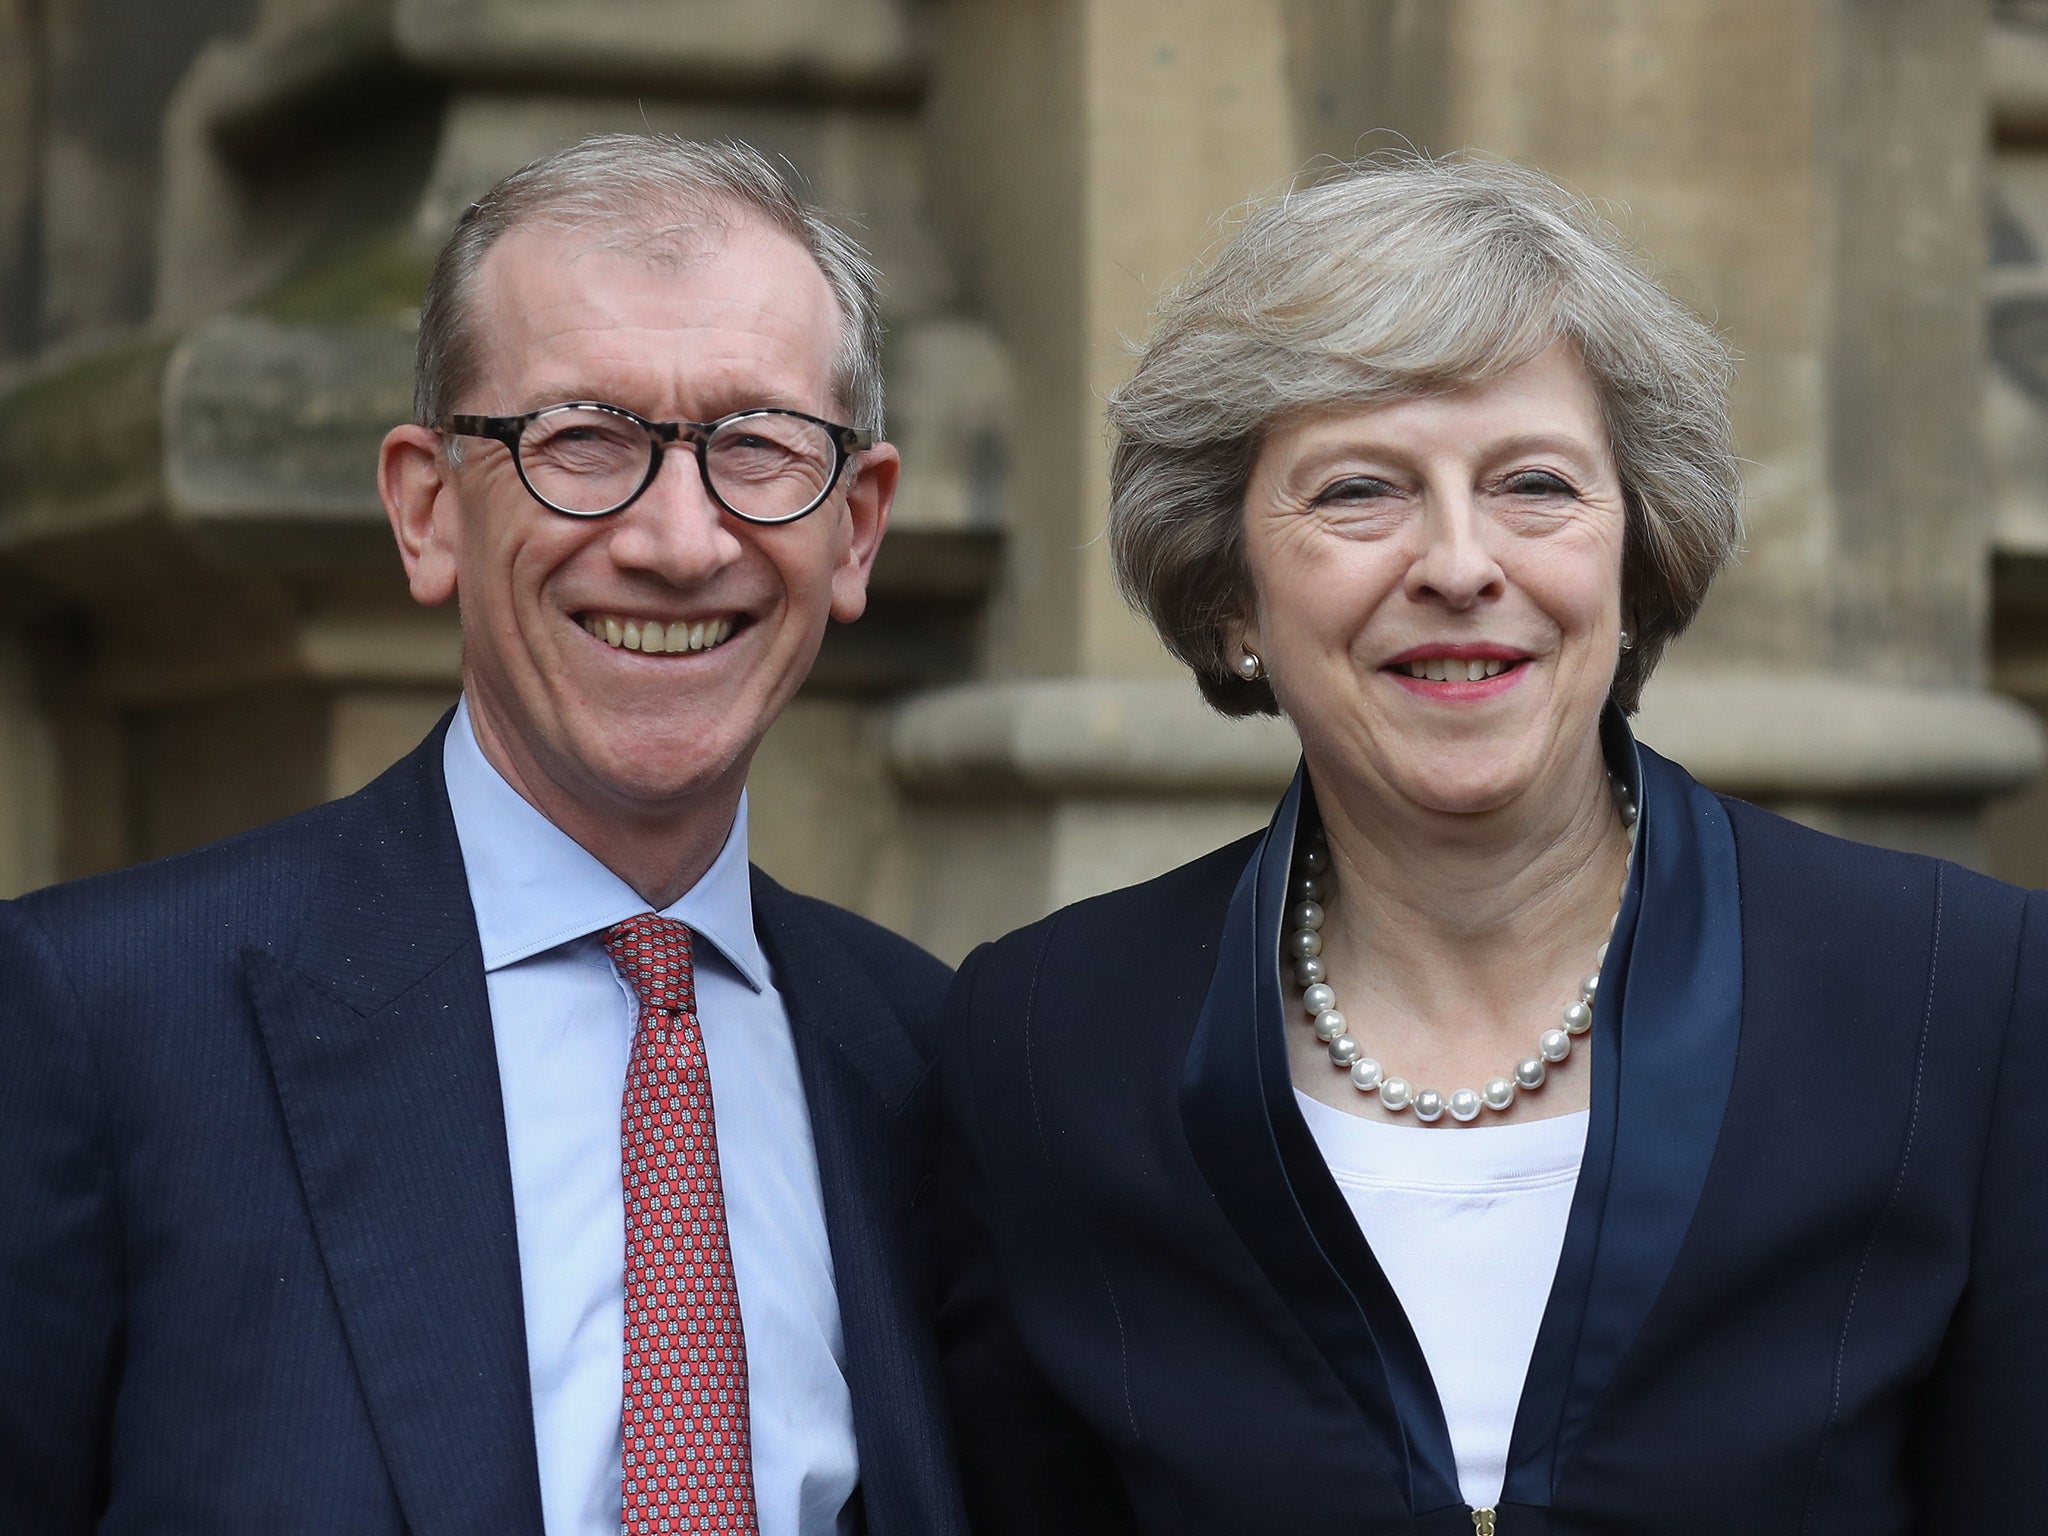 Theresa May with her husband Philip John May outside the Houses of Parliament before she makes a statement after Andrea Leadsom pulled out of the contest